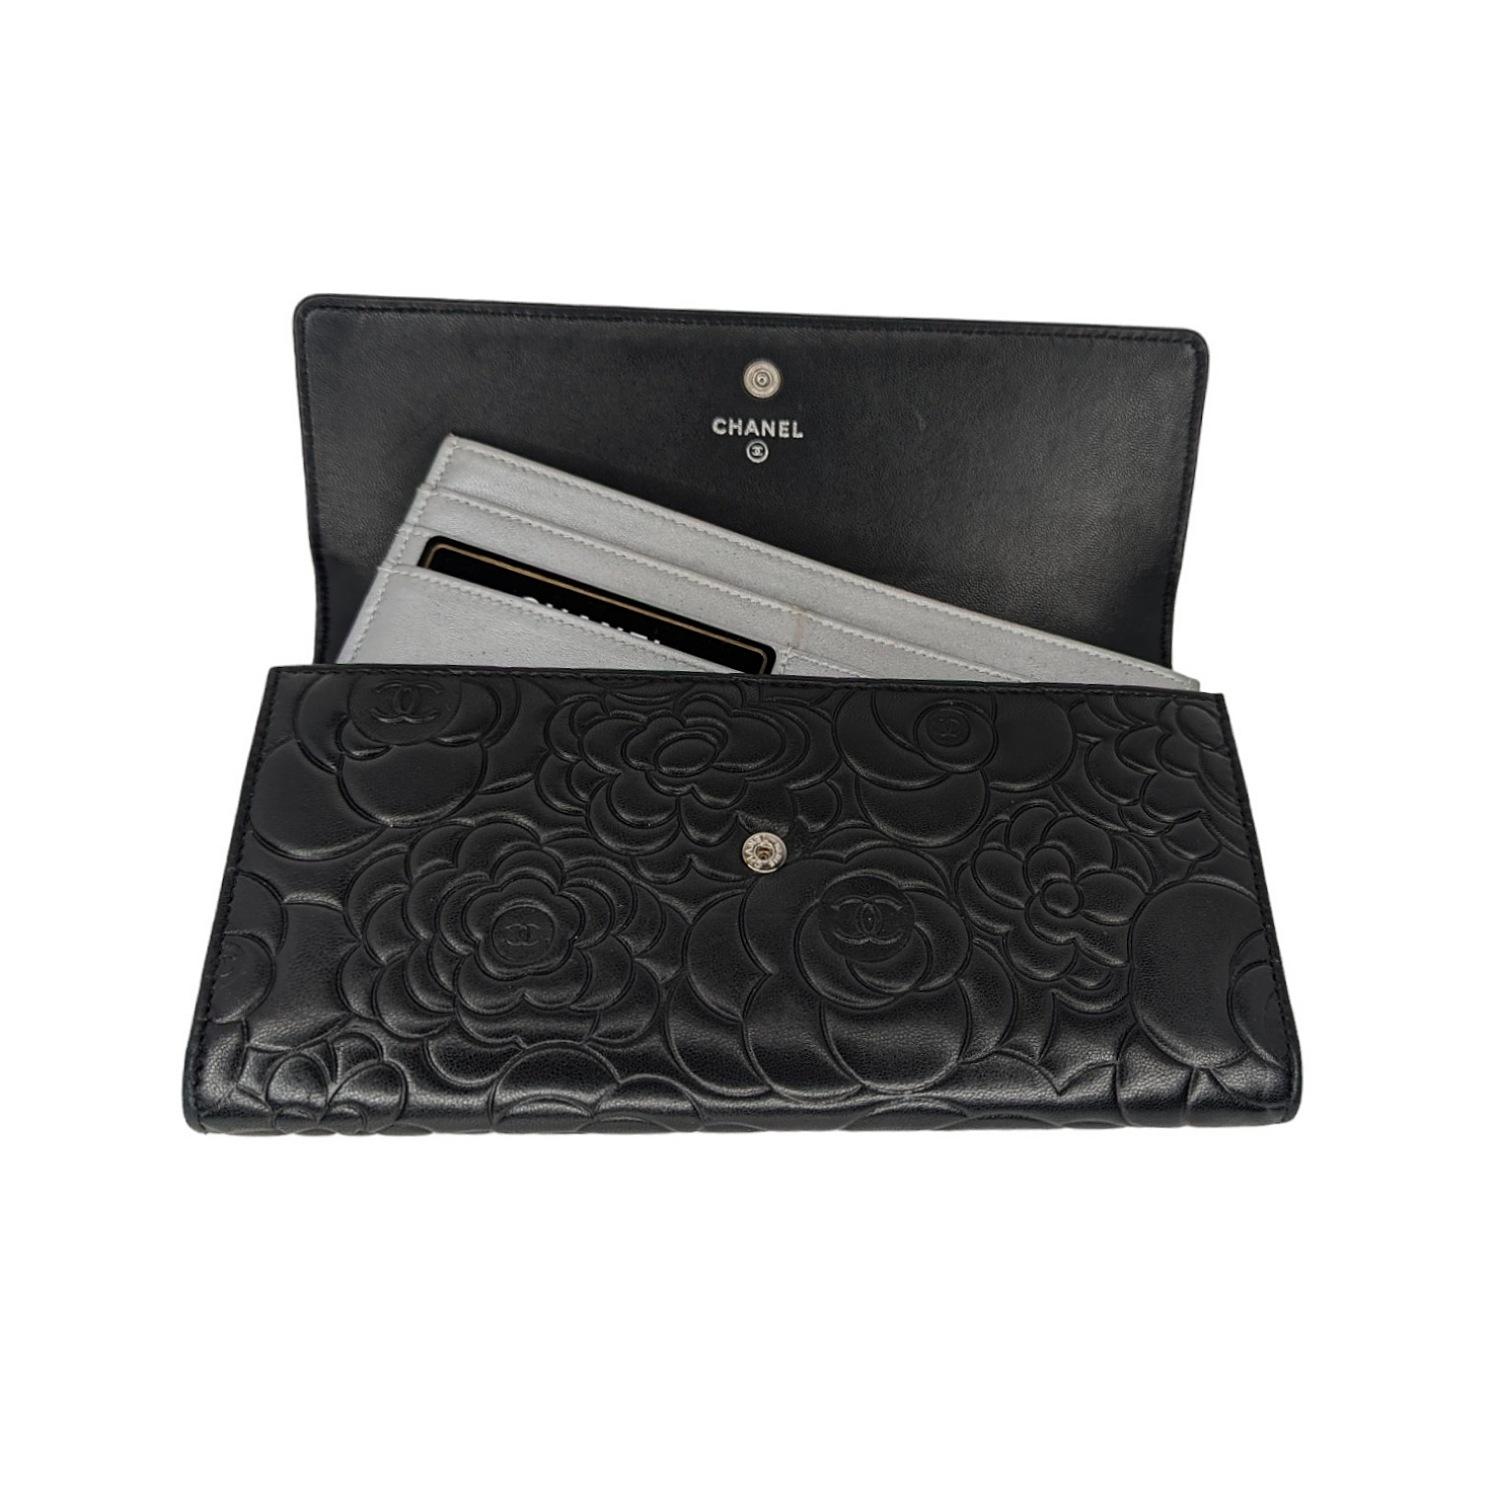 This chic wallet clutch is crafted of camellia embossed lambskin leather in black. It features a crossover flap with a polished silver interlocking CC logo, which opens to a silver leather interior with 6 card slots and removable flat insert with 6